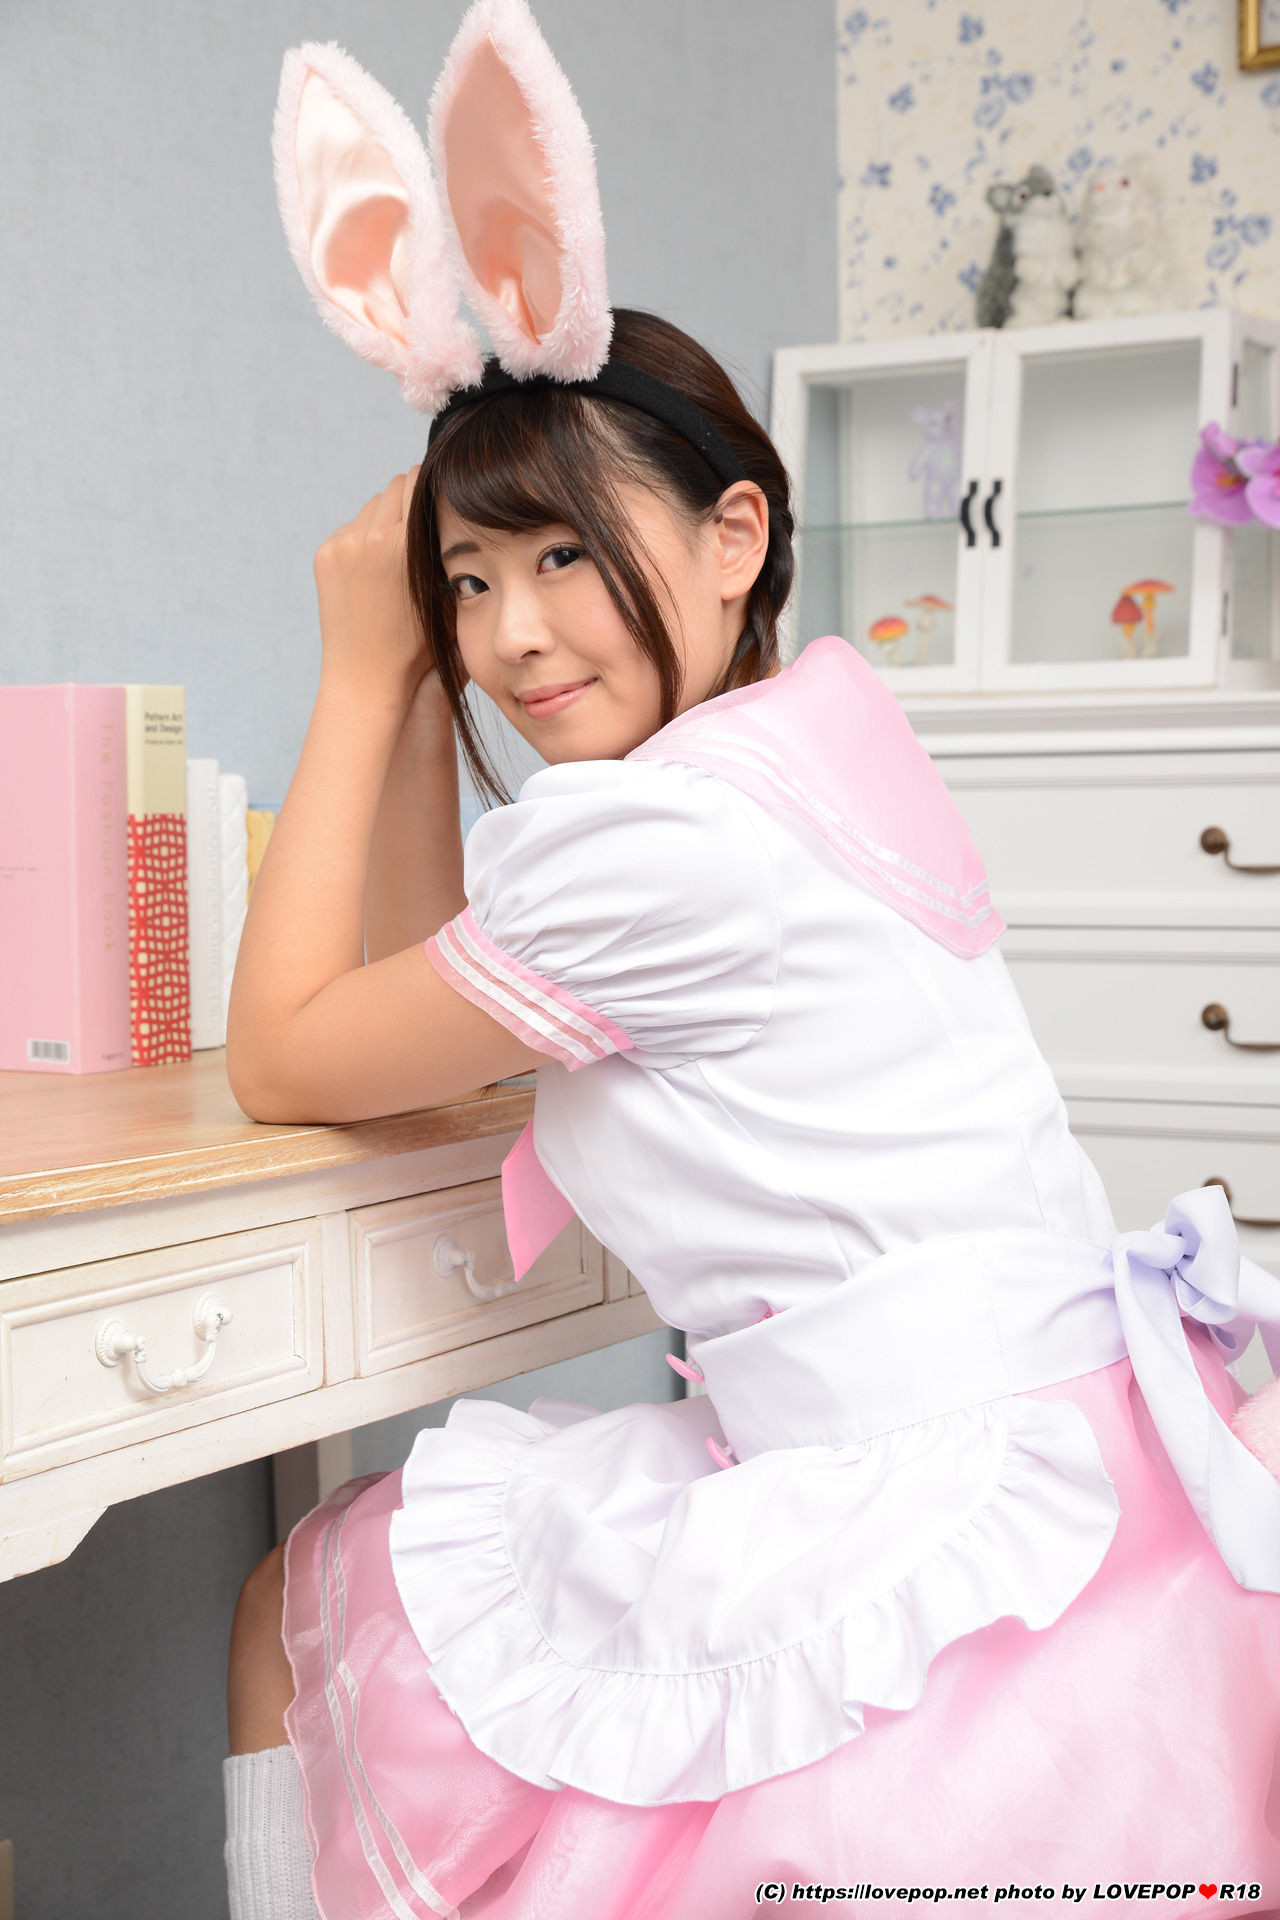 [LOVEPOP] Special Maid Collection - Airi Satou さとう愛理 Photoset 04  第2张